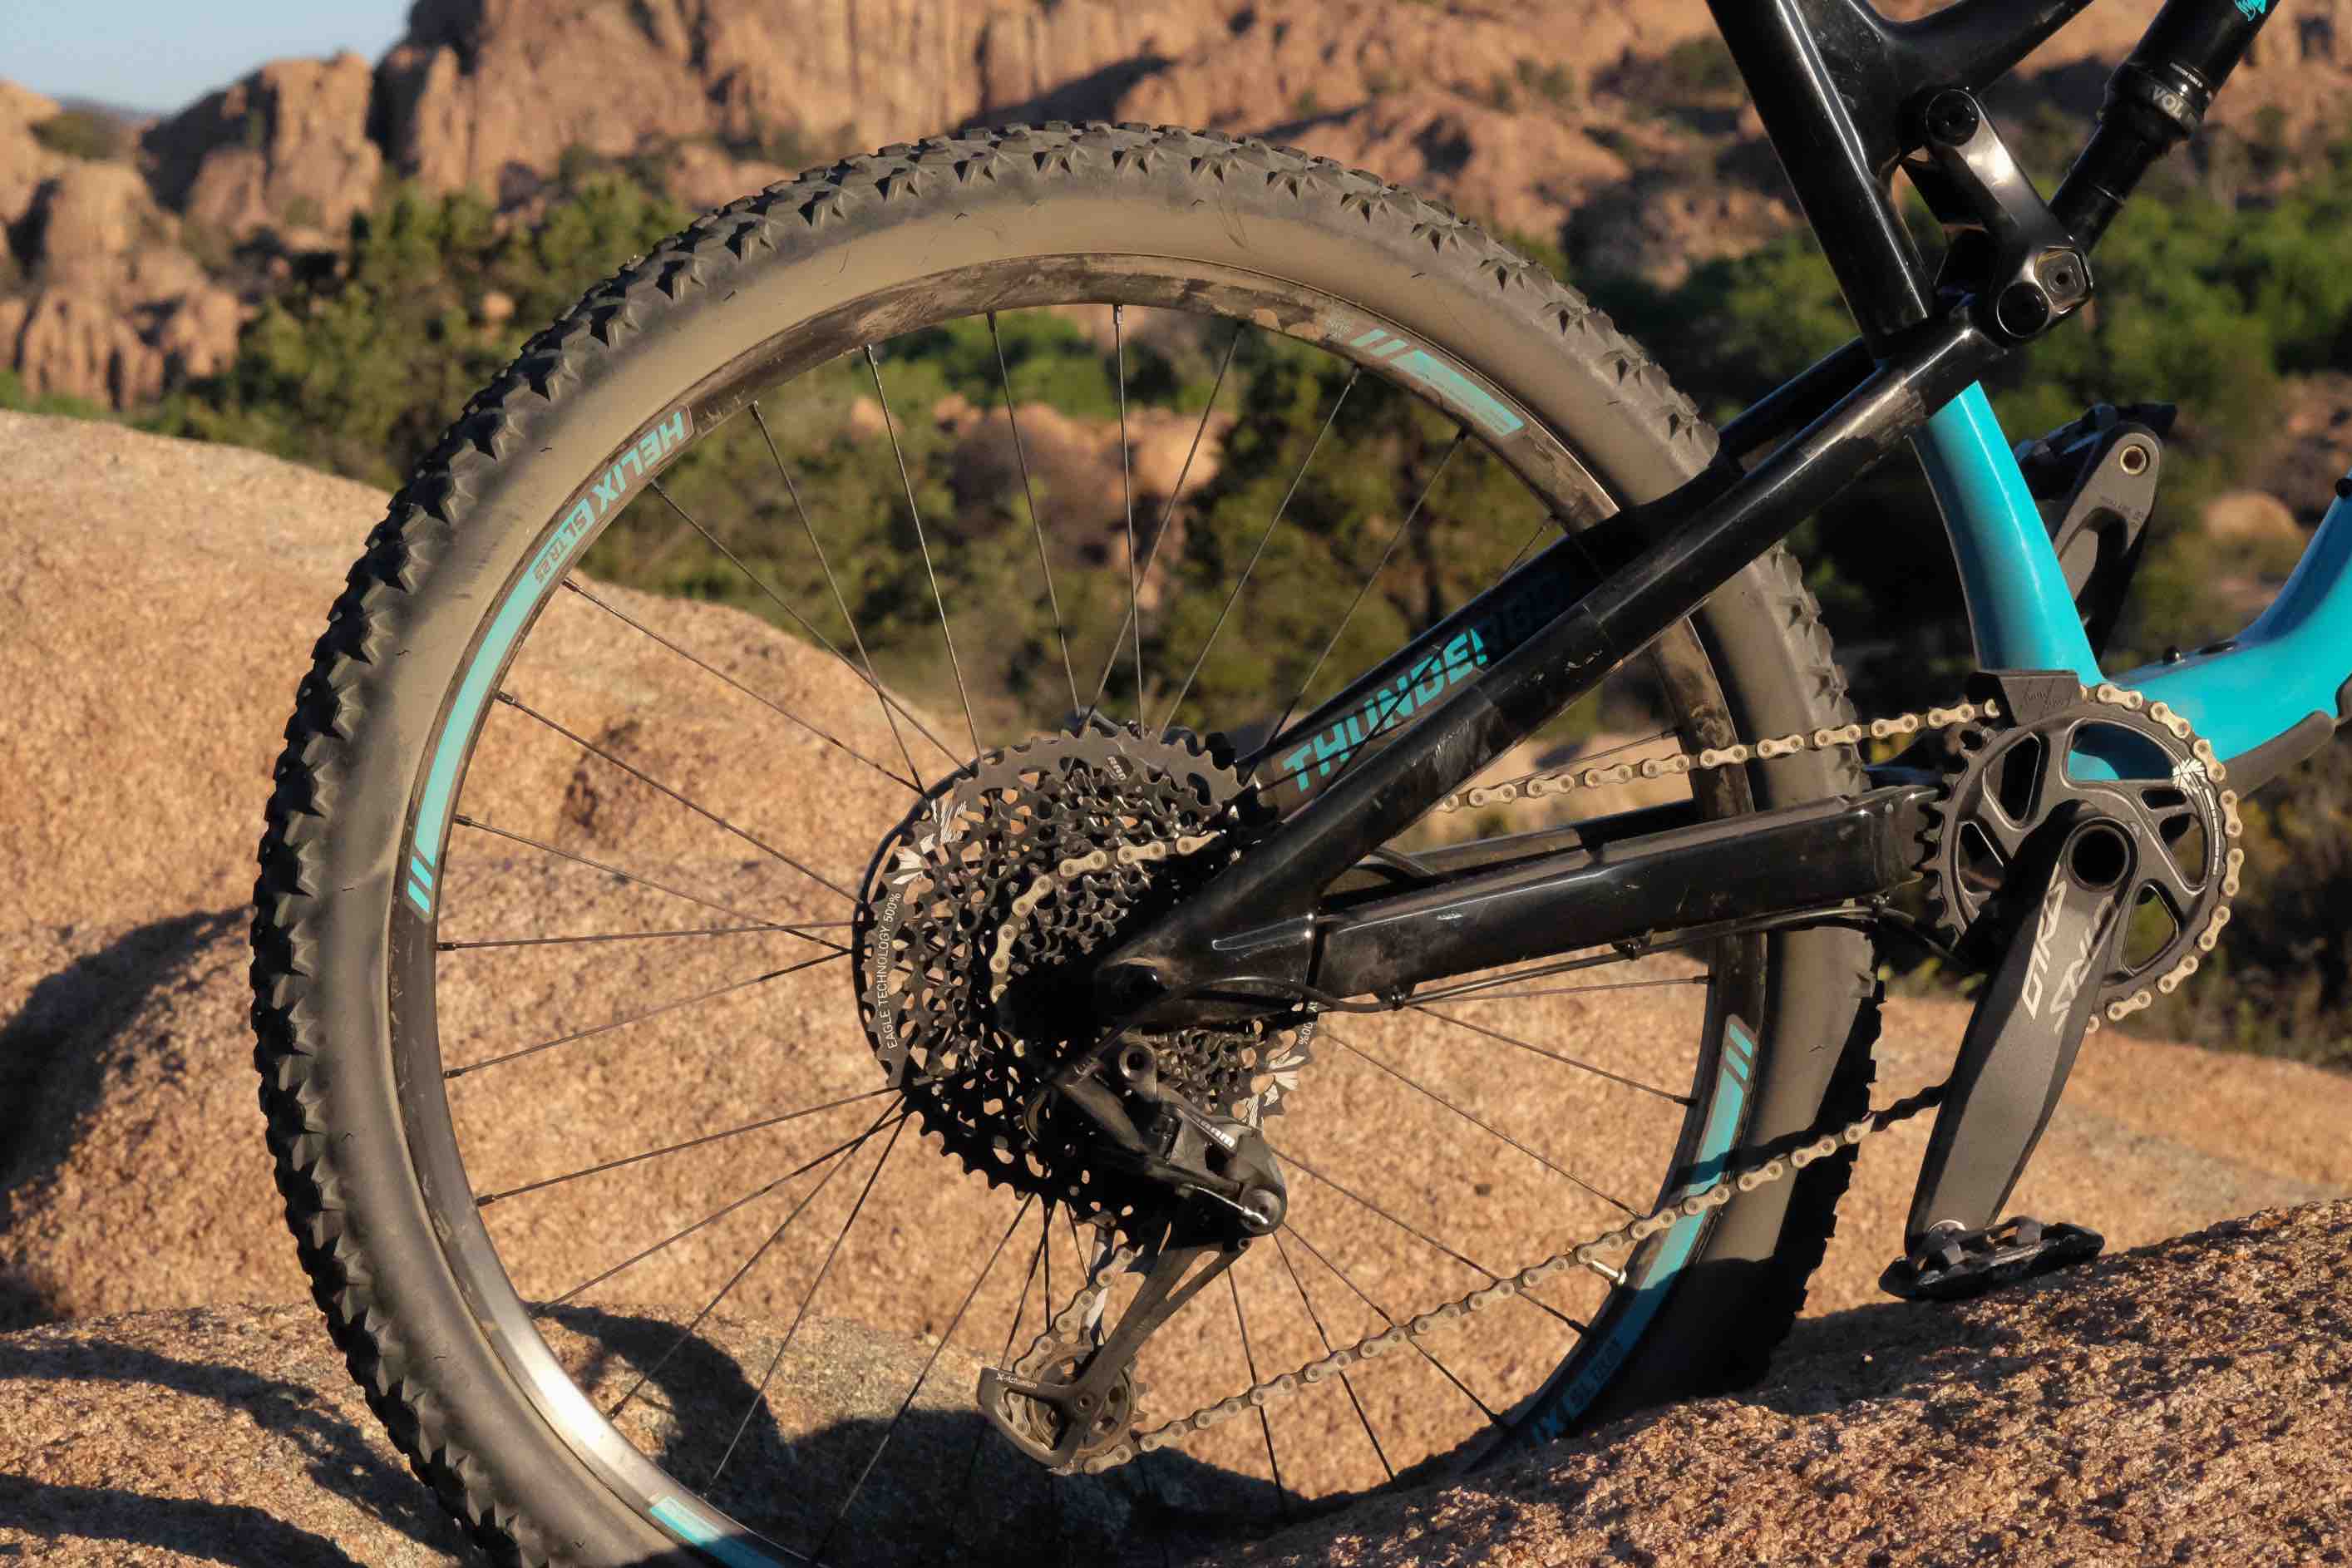 We test Ritchey's Bite and Drive WCS tires.